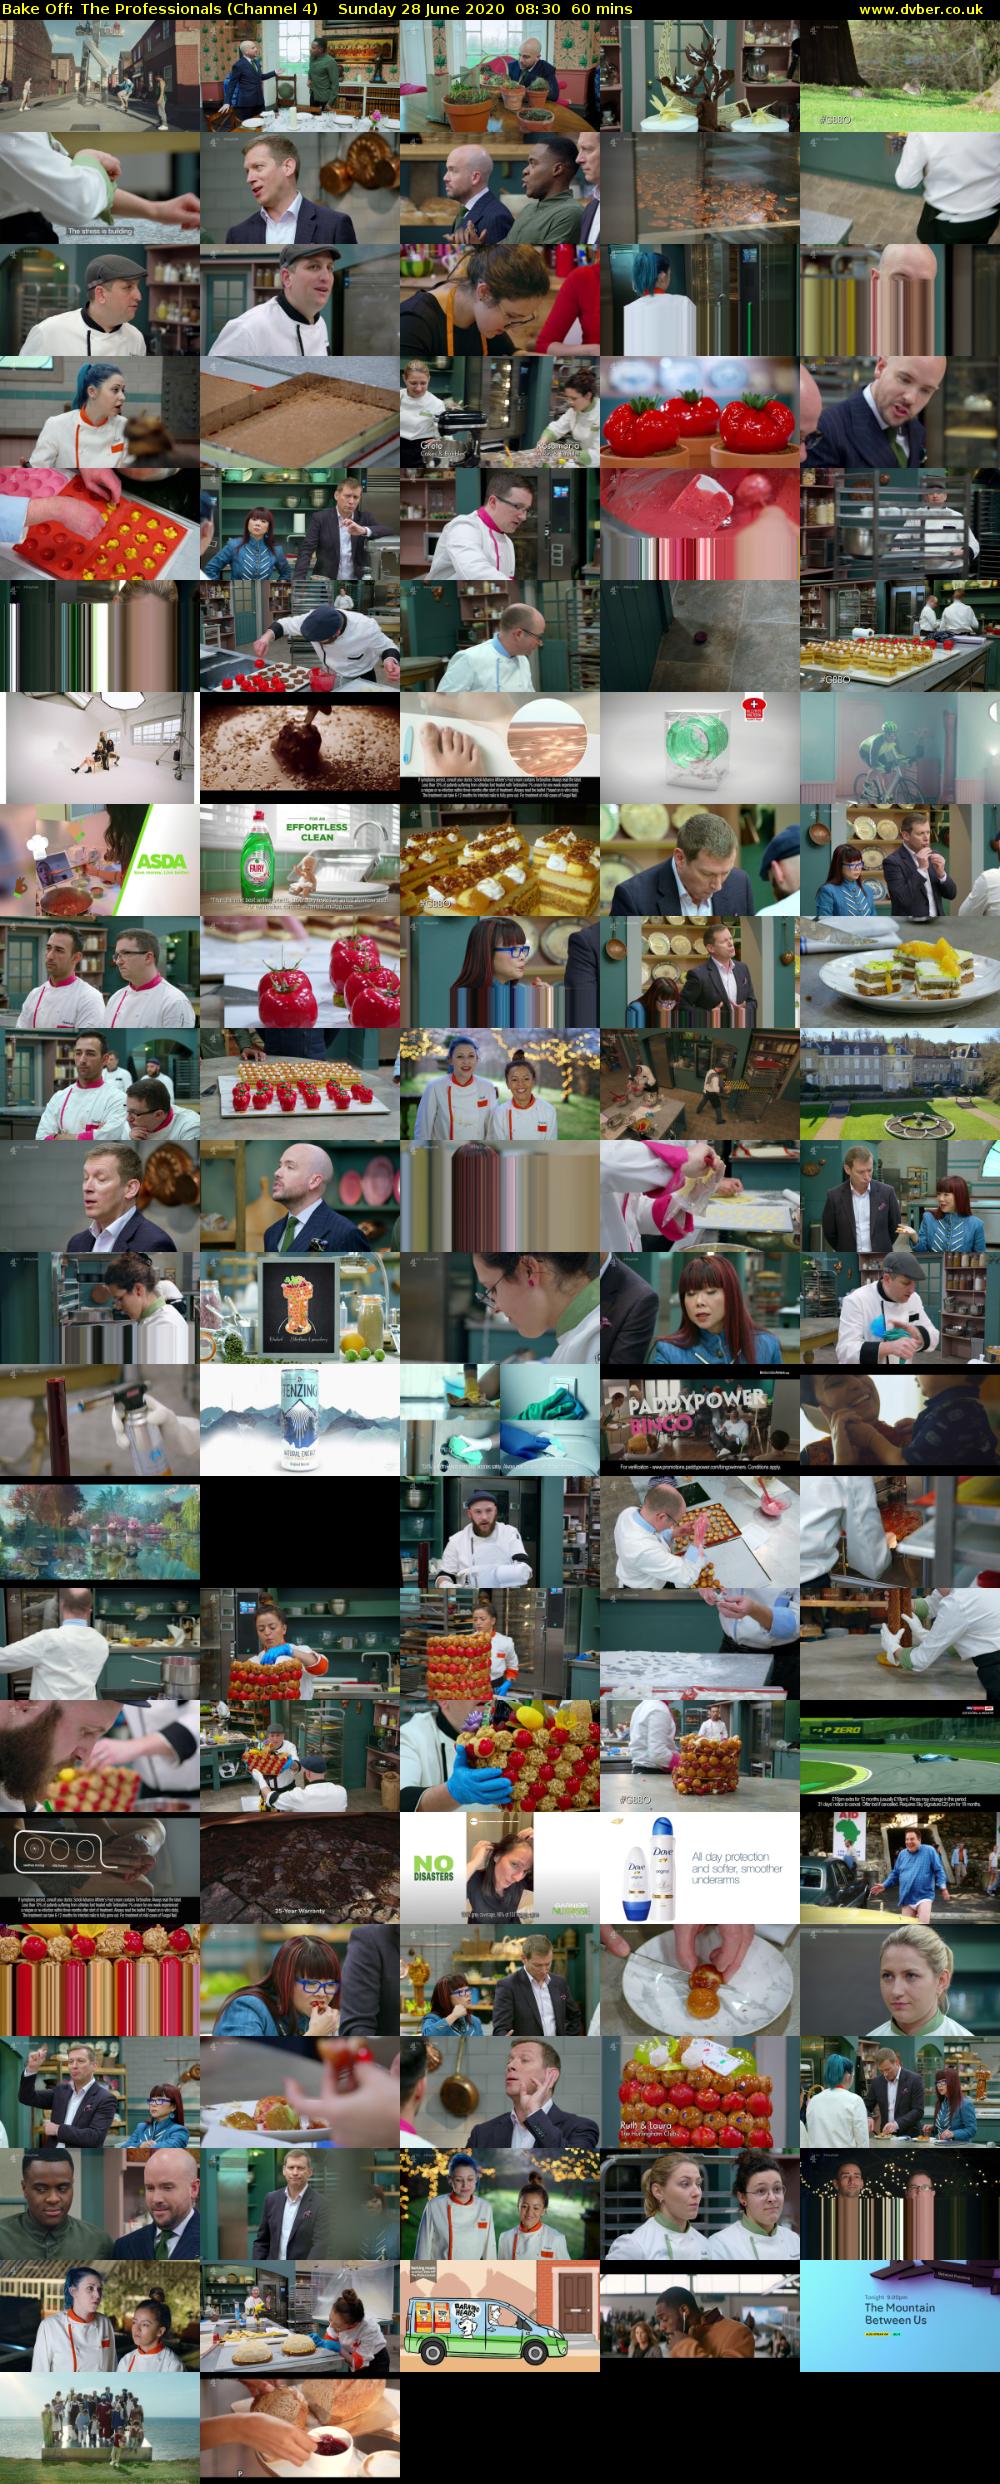 Bake Off: The Professionals (Channel 4) Sunday 28 June 2020 08:30 - 09:30